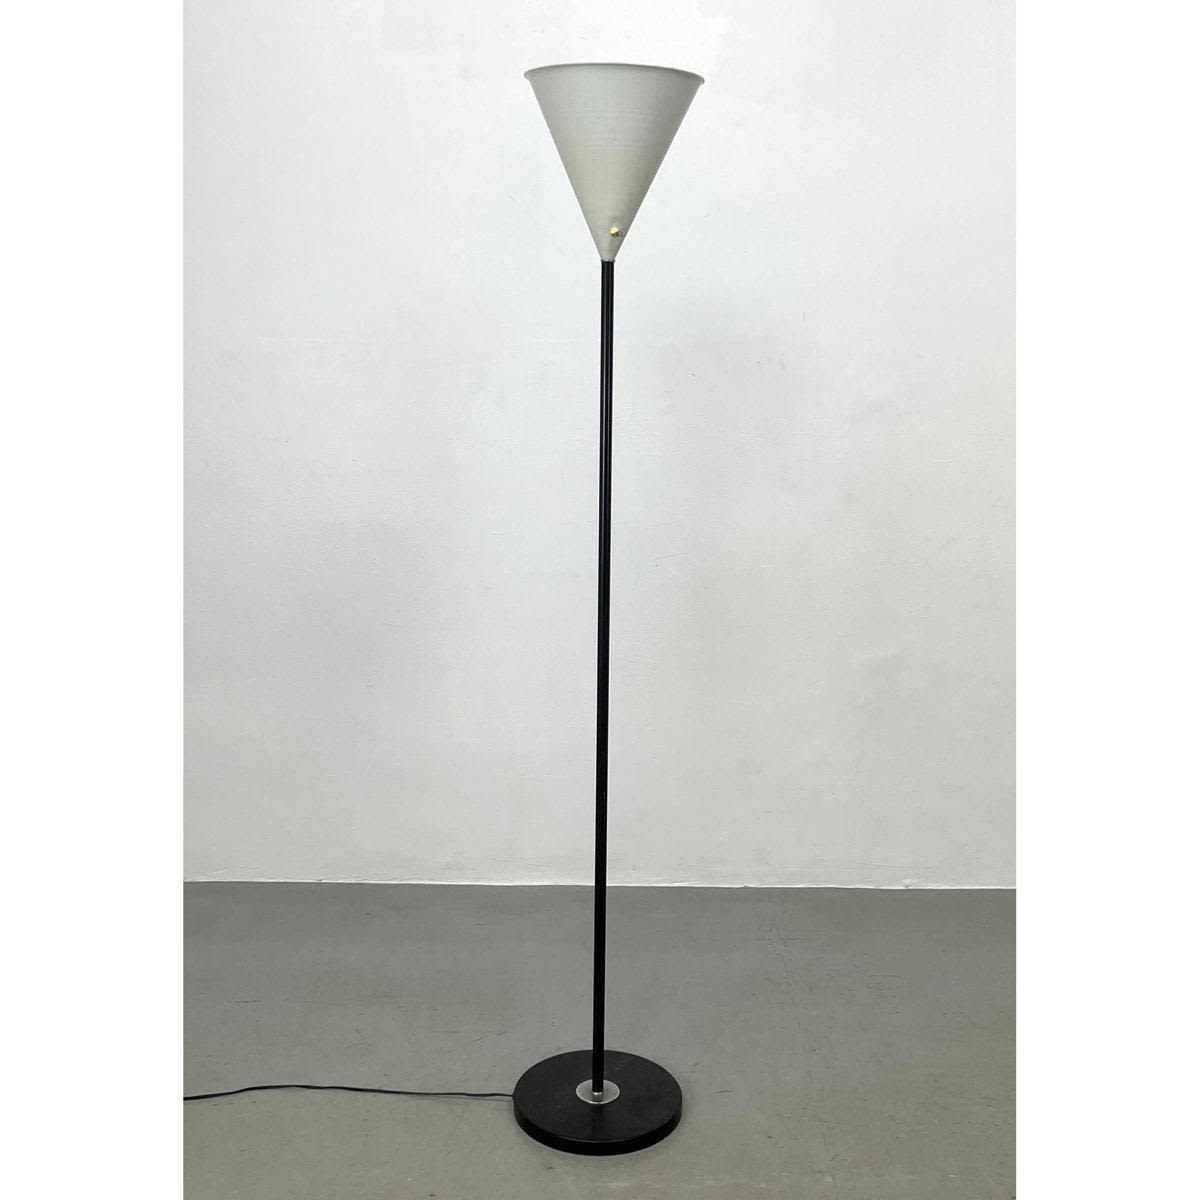 Cone Shade Torchiere Floor Lamp  2b7fe0